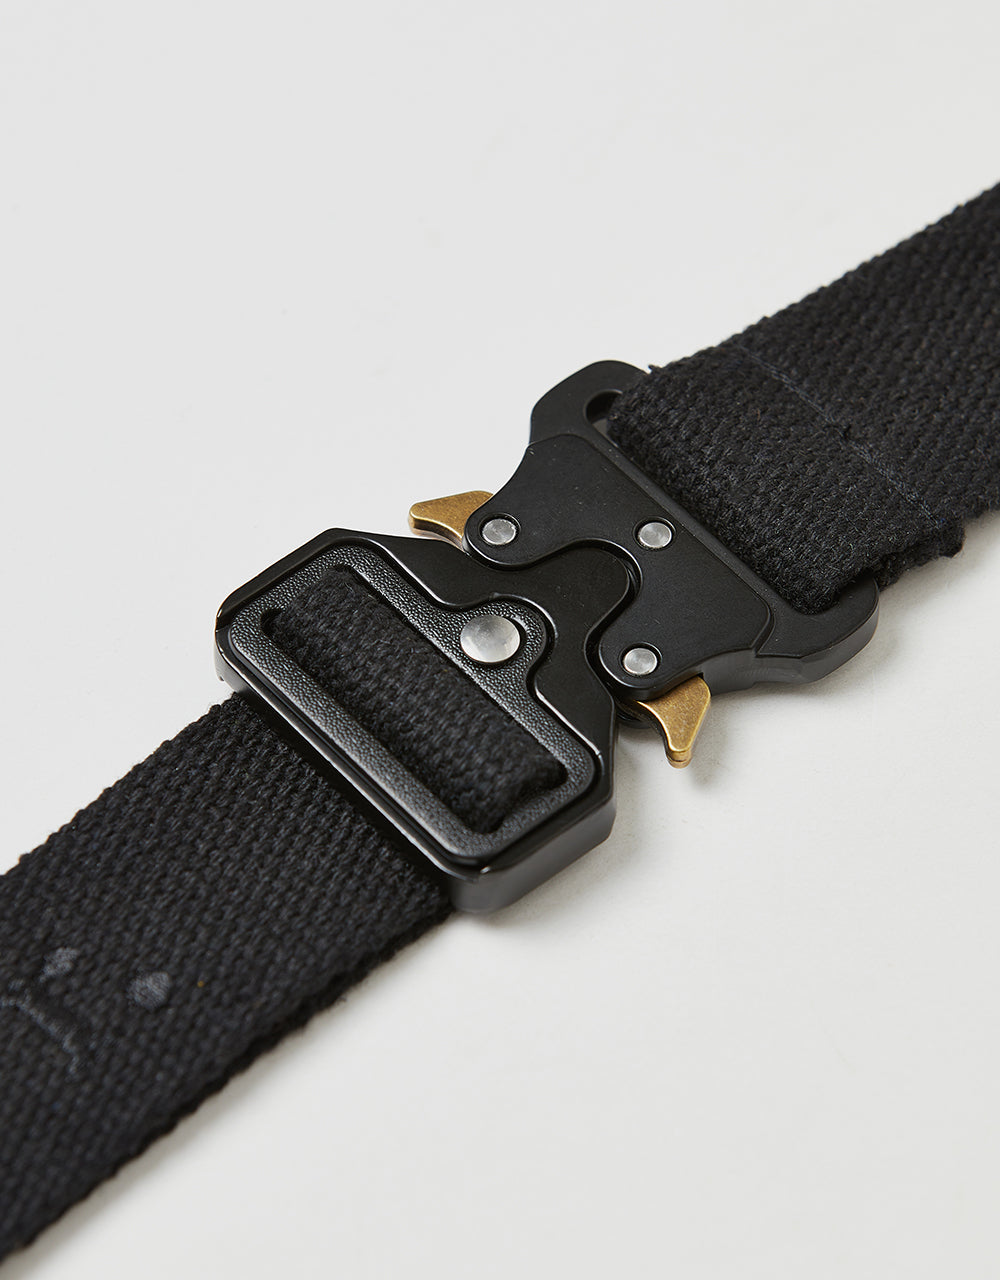 Route One Military Belt - Black